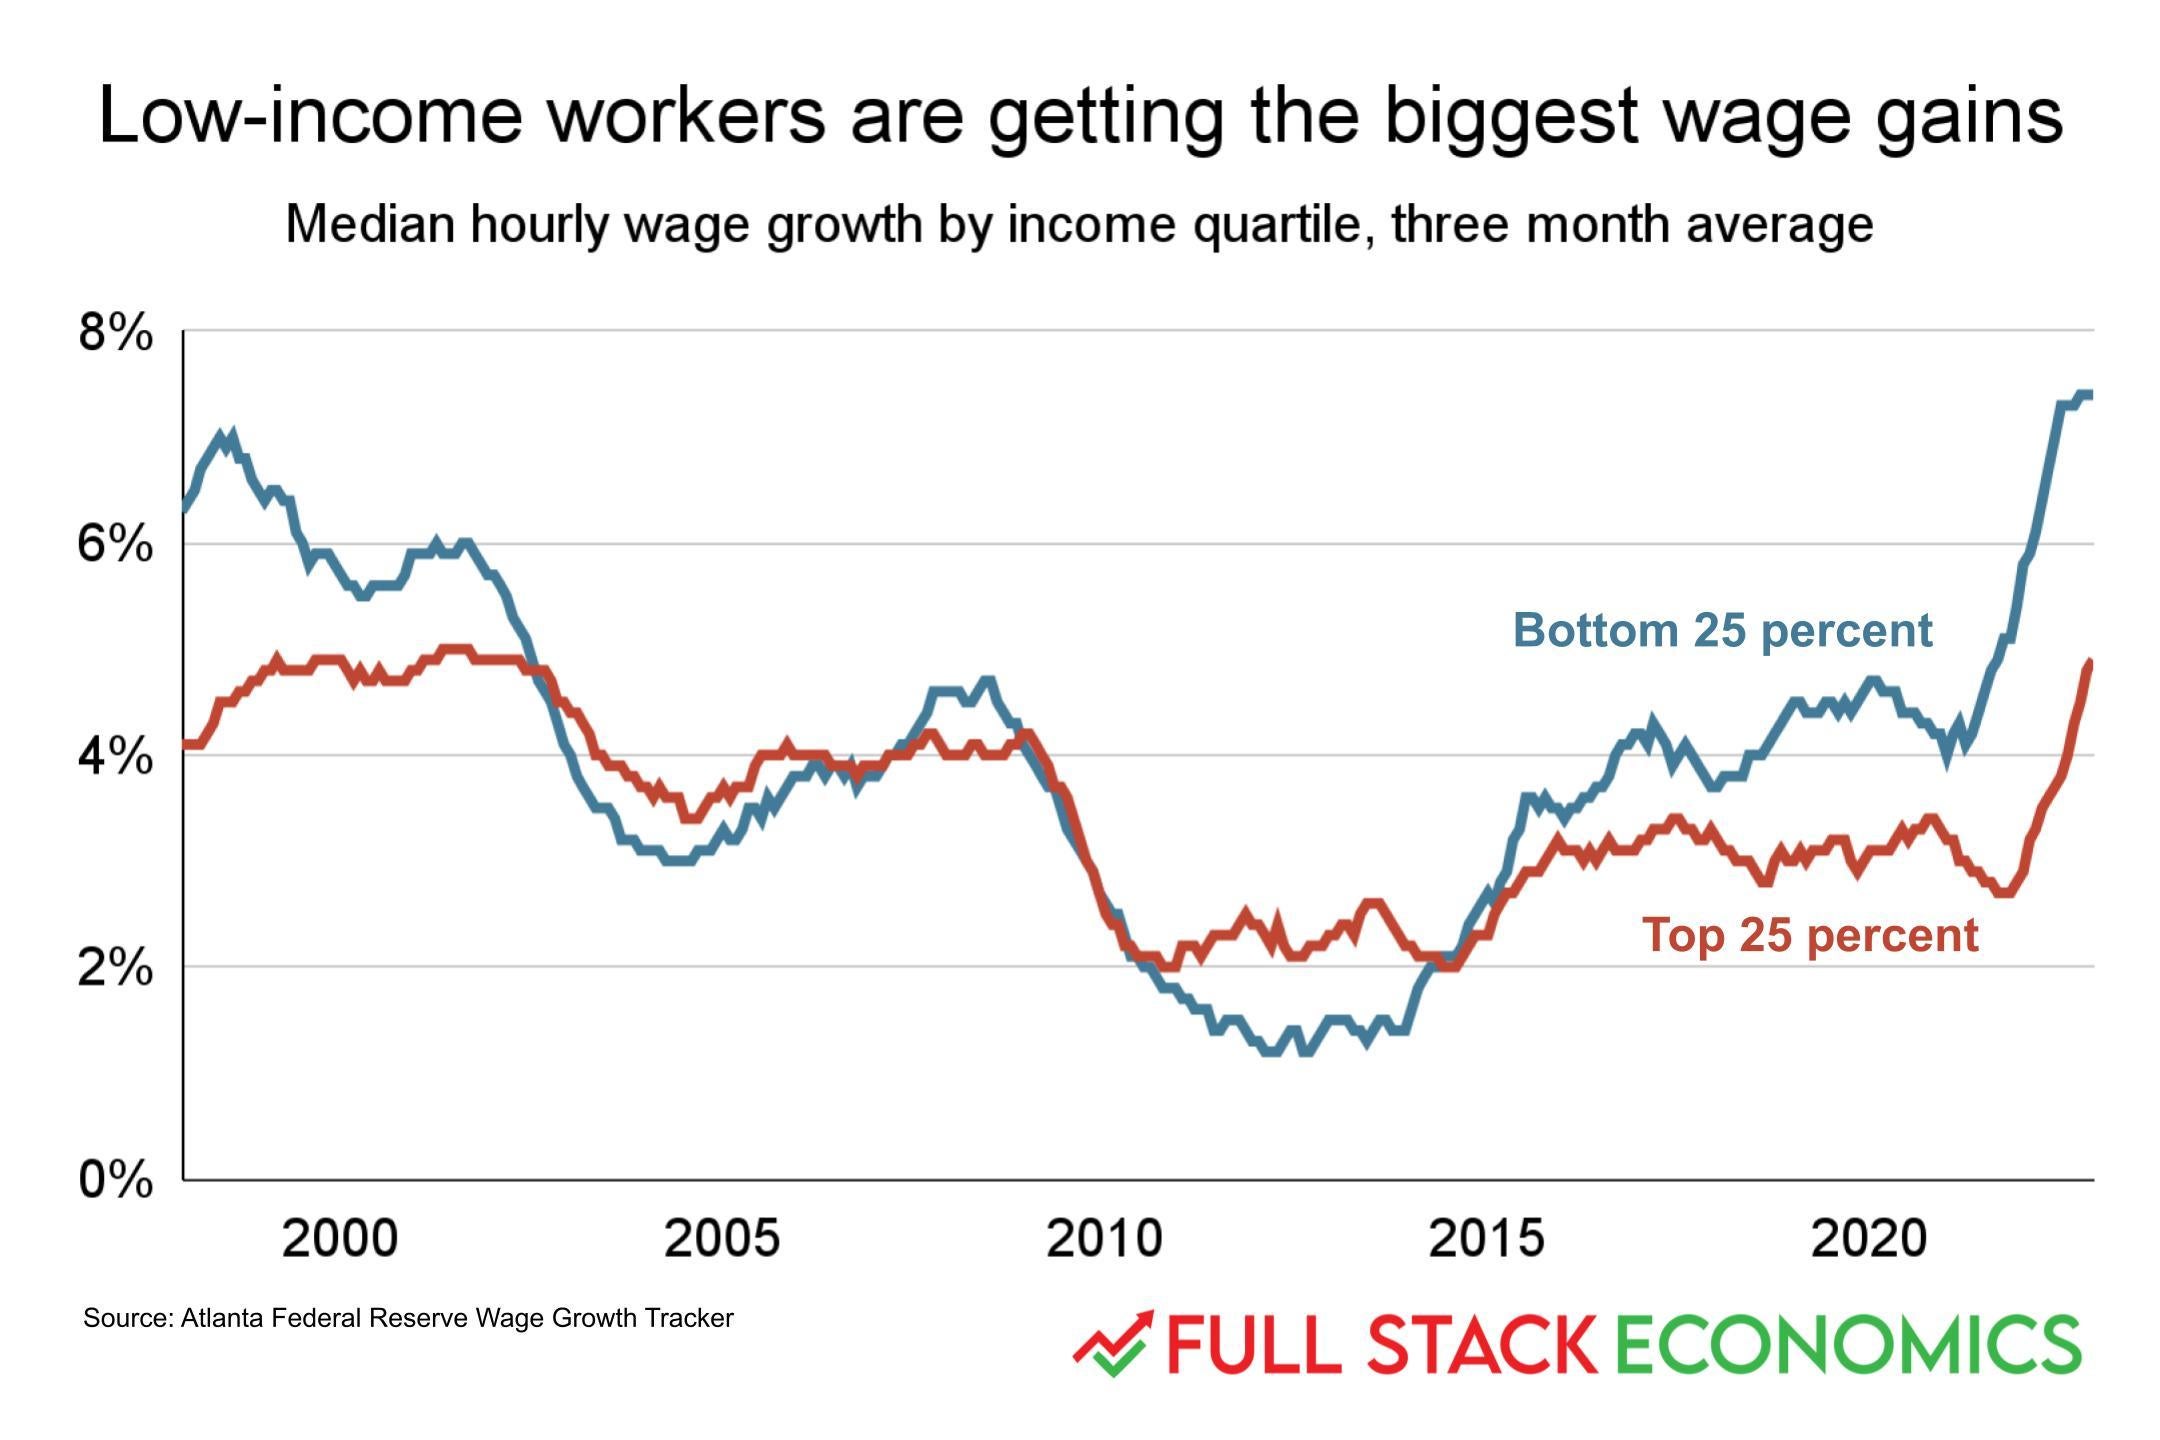 Low-income workers are getting the biggest share of wage gains, the chart shows.